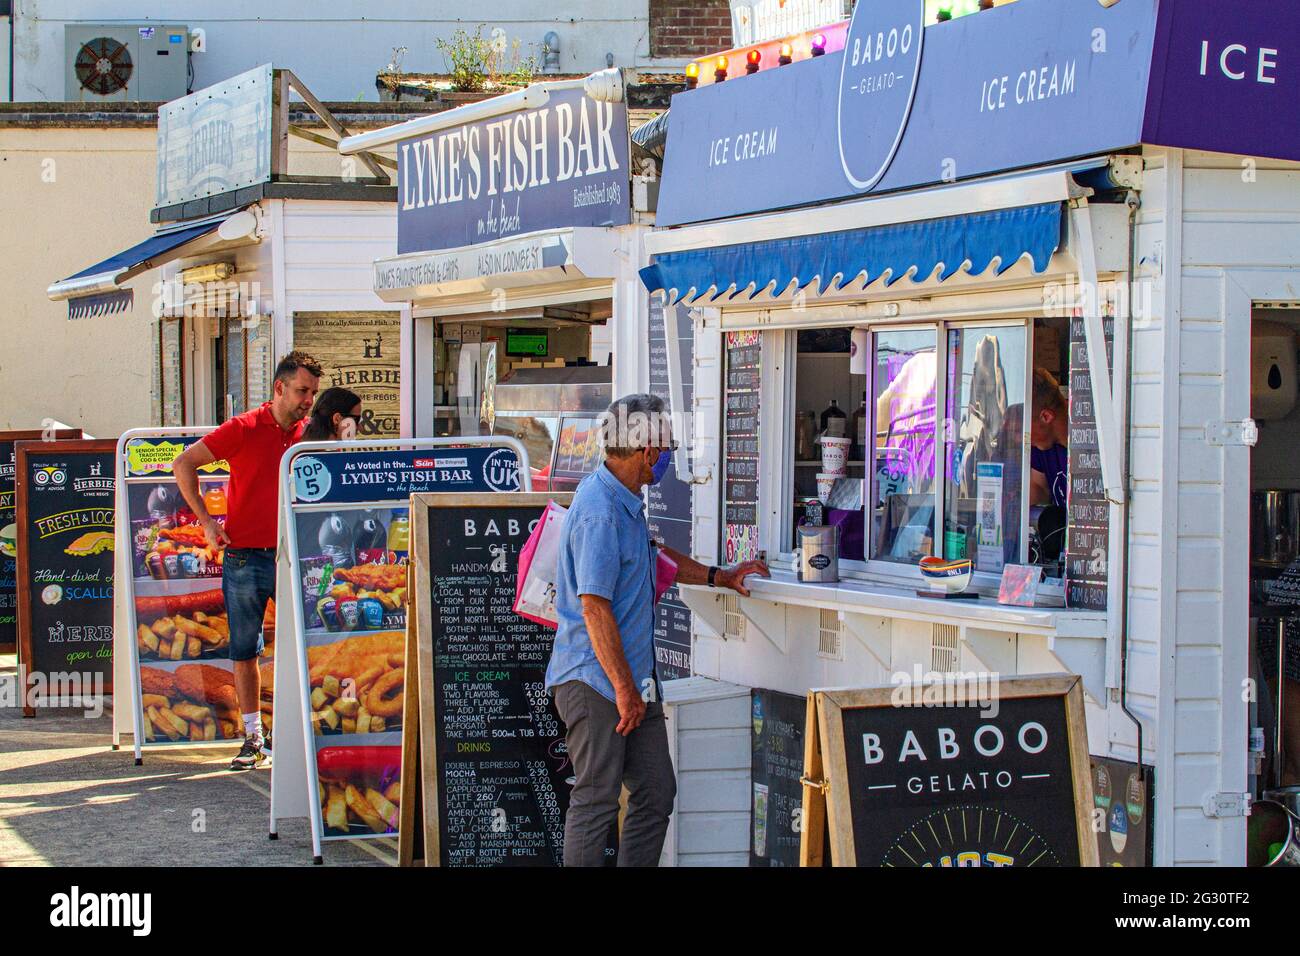 People queue, socially distanced, for ice cream and fish & chips, at takeaway stalls on the beach at Lyme Regis, Jurassic Coast, Dorset, England Stock Photo